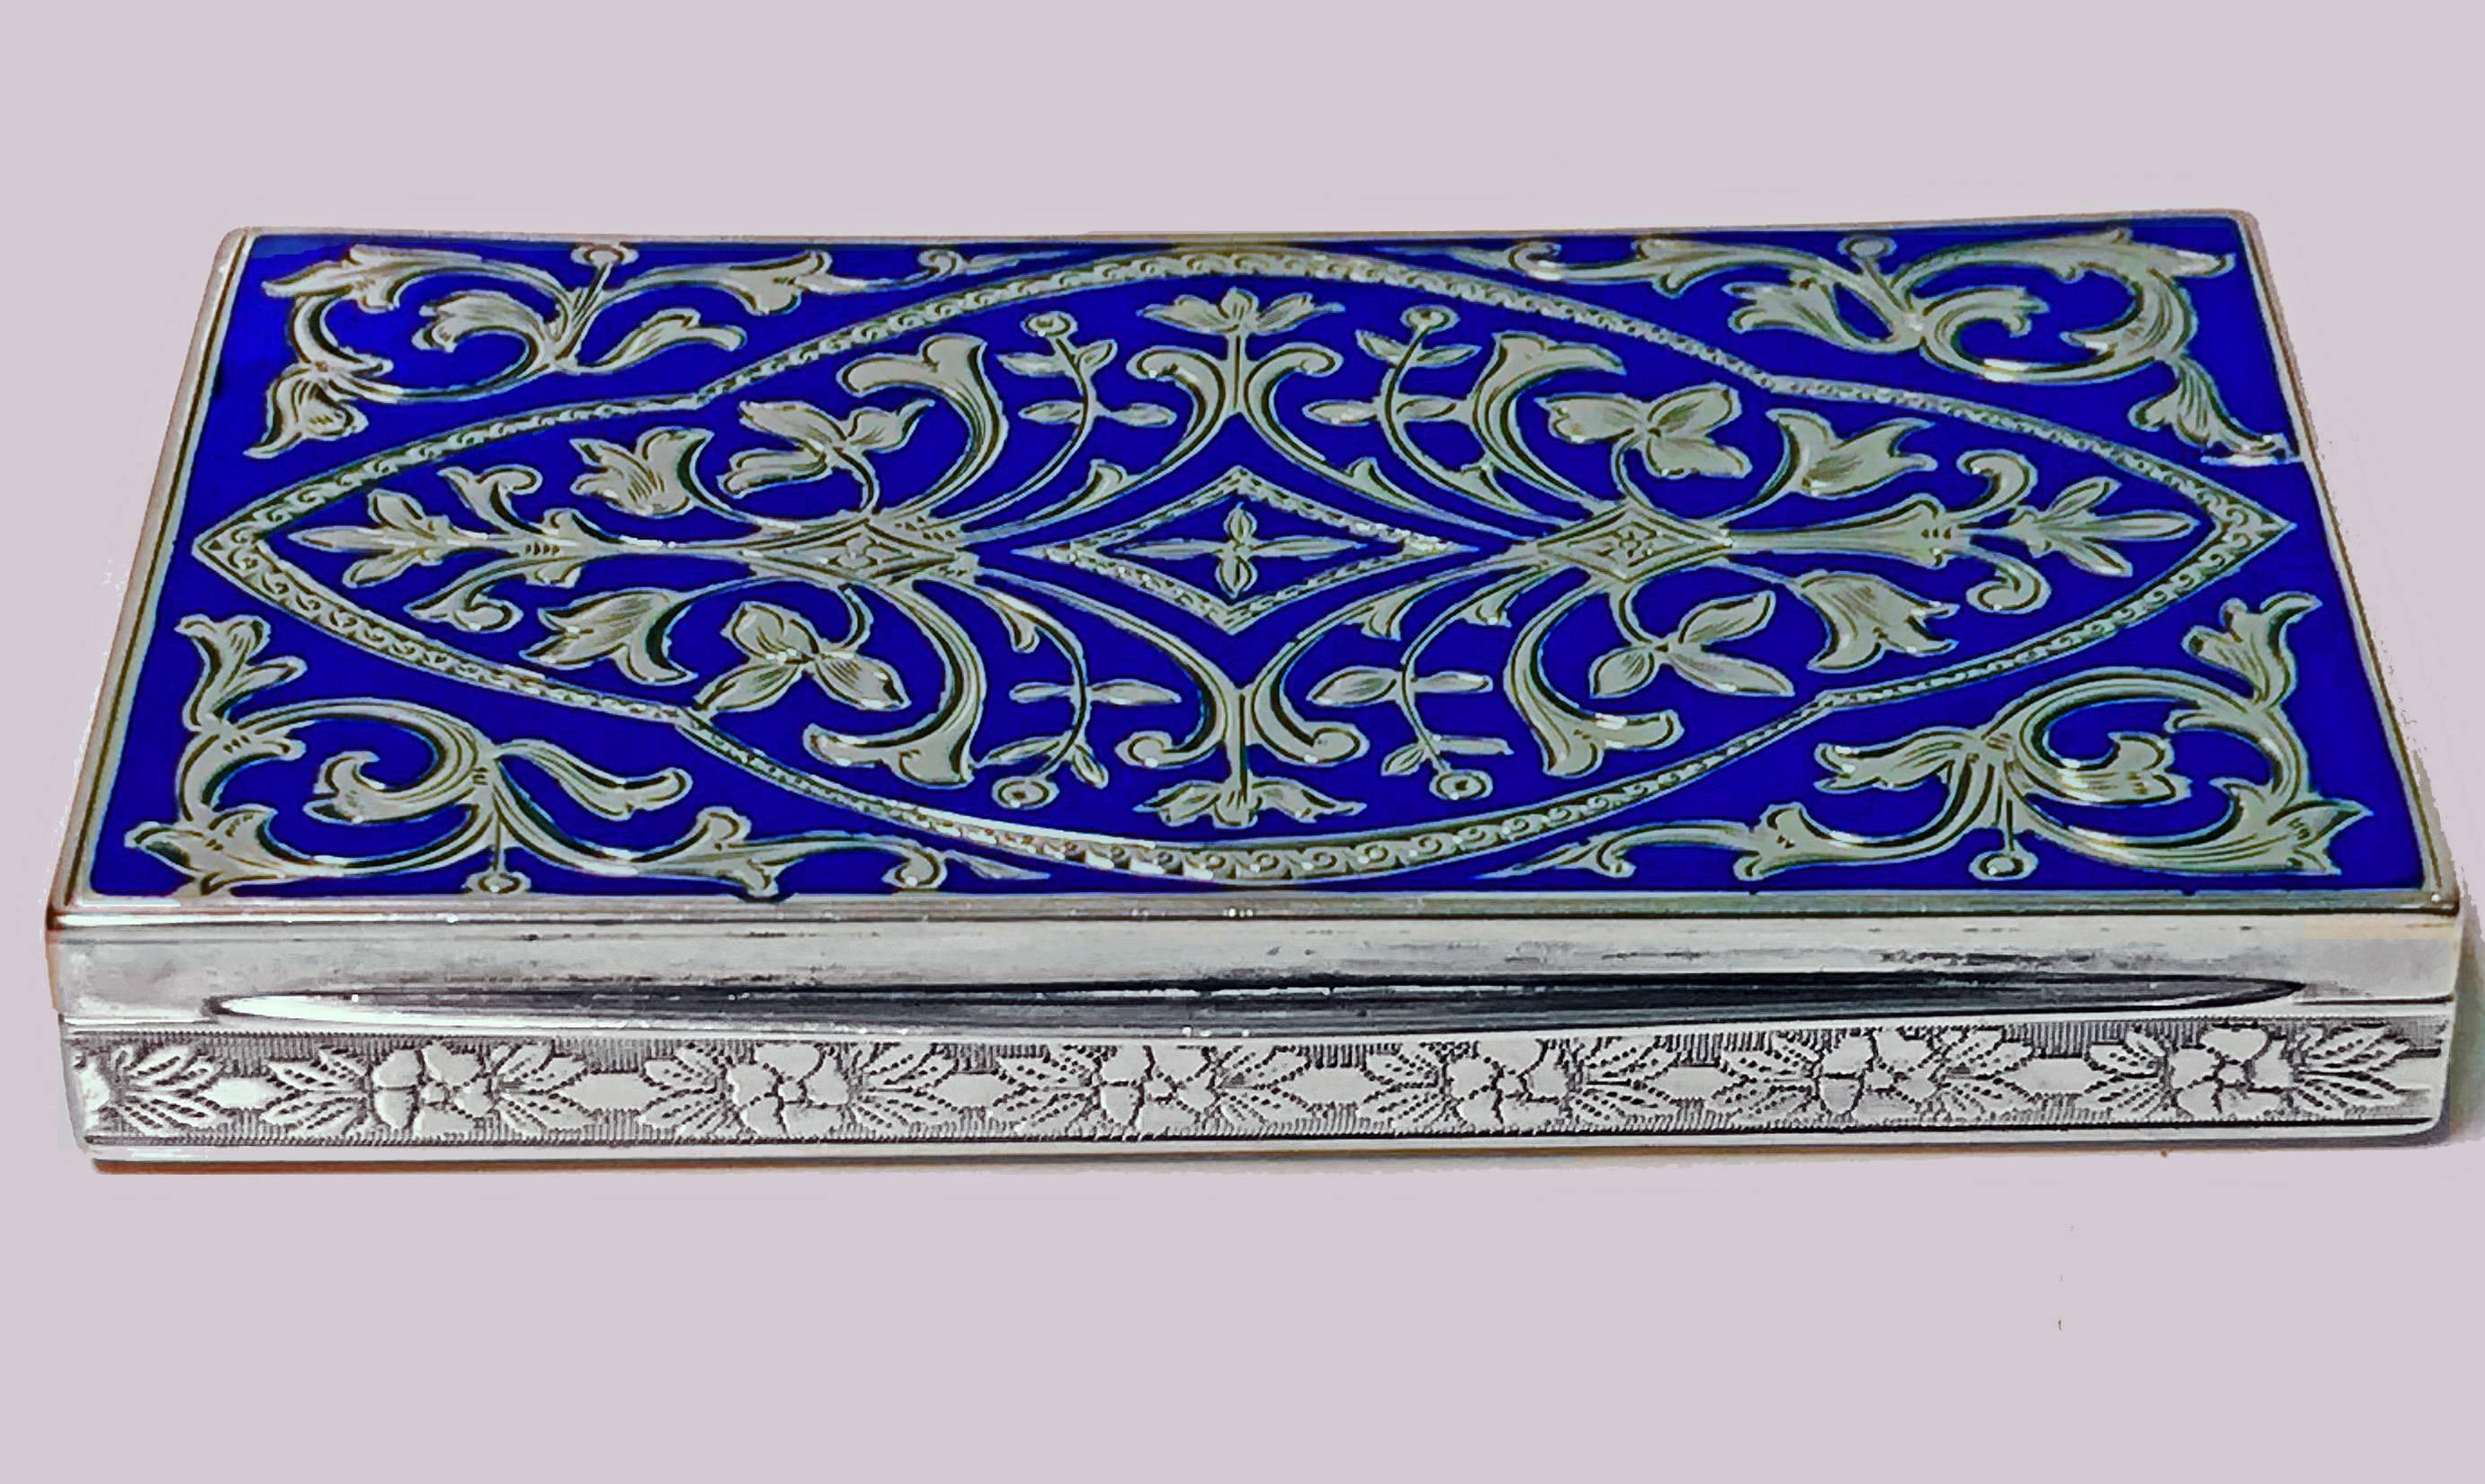 Continental silver and royal blue enamel box, circa 1920. The rectangular shape box with front cover royal blue enamel with inlay of fleur de lys foliage silver decoration, the sides with engraved foliage rosette border against stippled background,